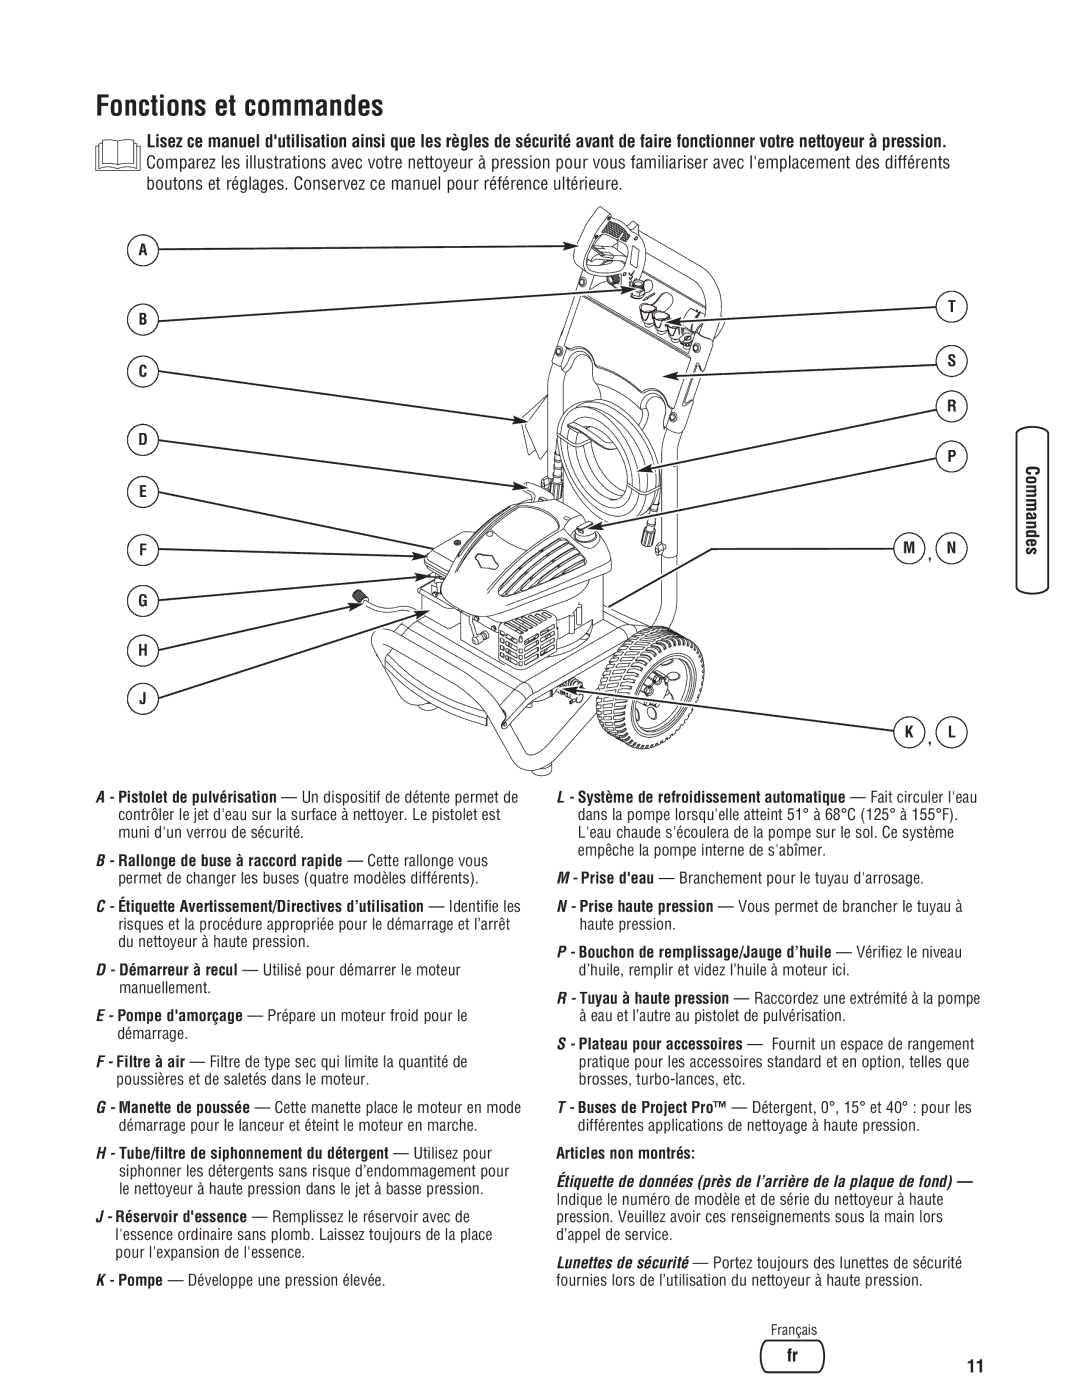 Briggs & Stratton Pressure Washer manual Fonctions et commandes 